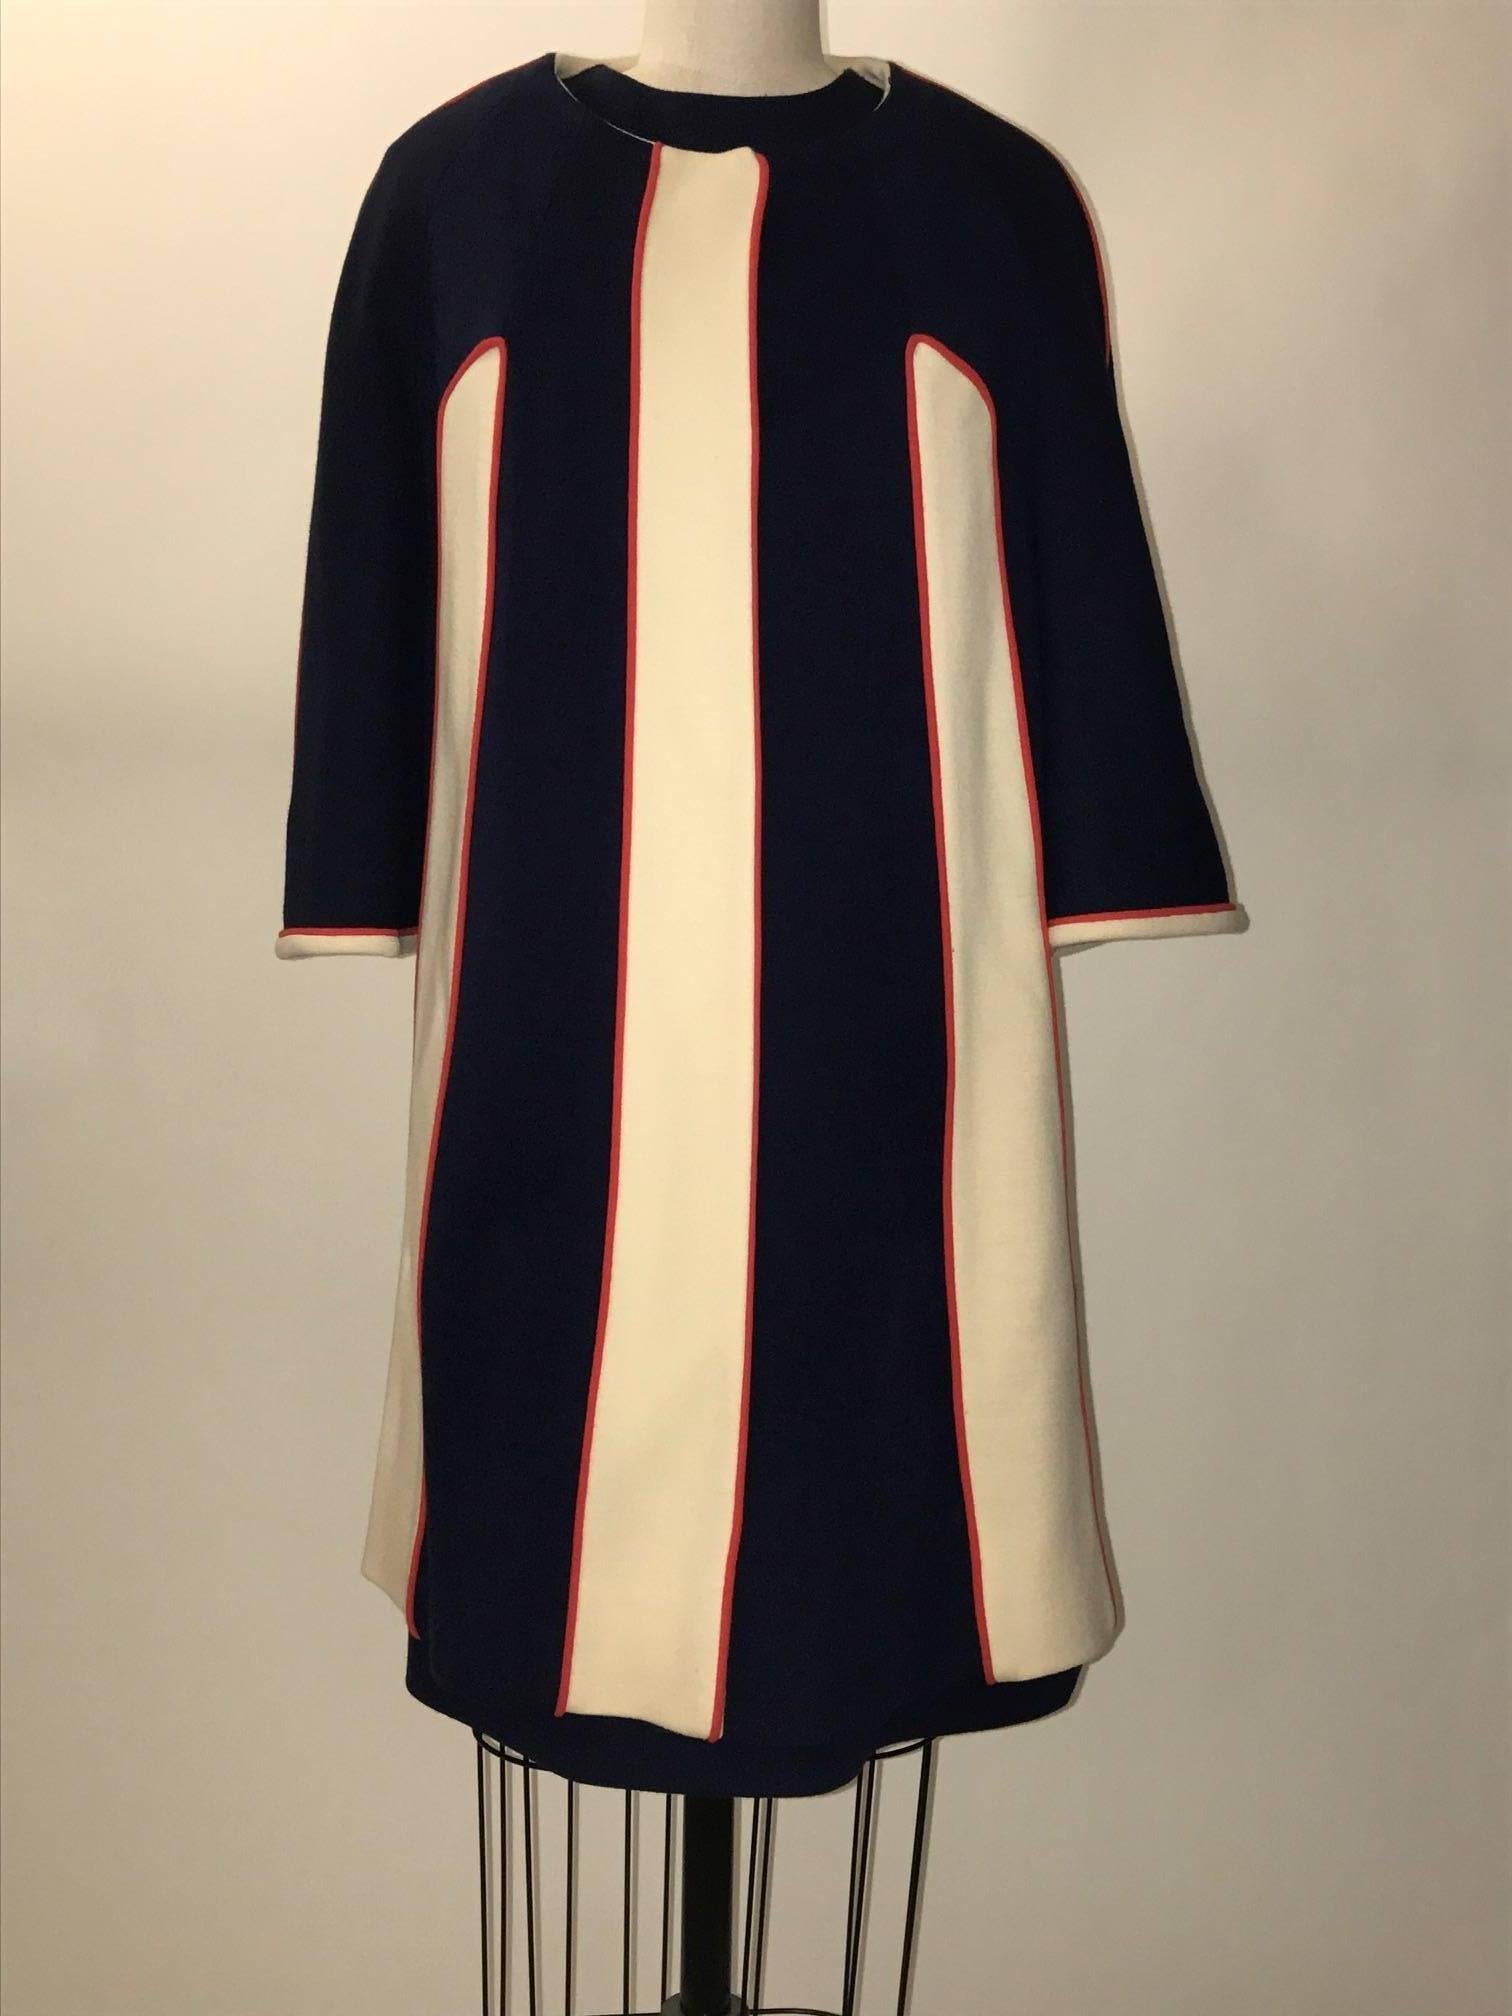 Vintage 1960's Lilli Ann by Adolph Schuman knit swing coat and sleeveless shift dress ensemble in navy and cream with red piping. Coat has mid length wide sleeves and fastens with four snaps at front. Dress fastens with back zip and hook and